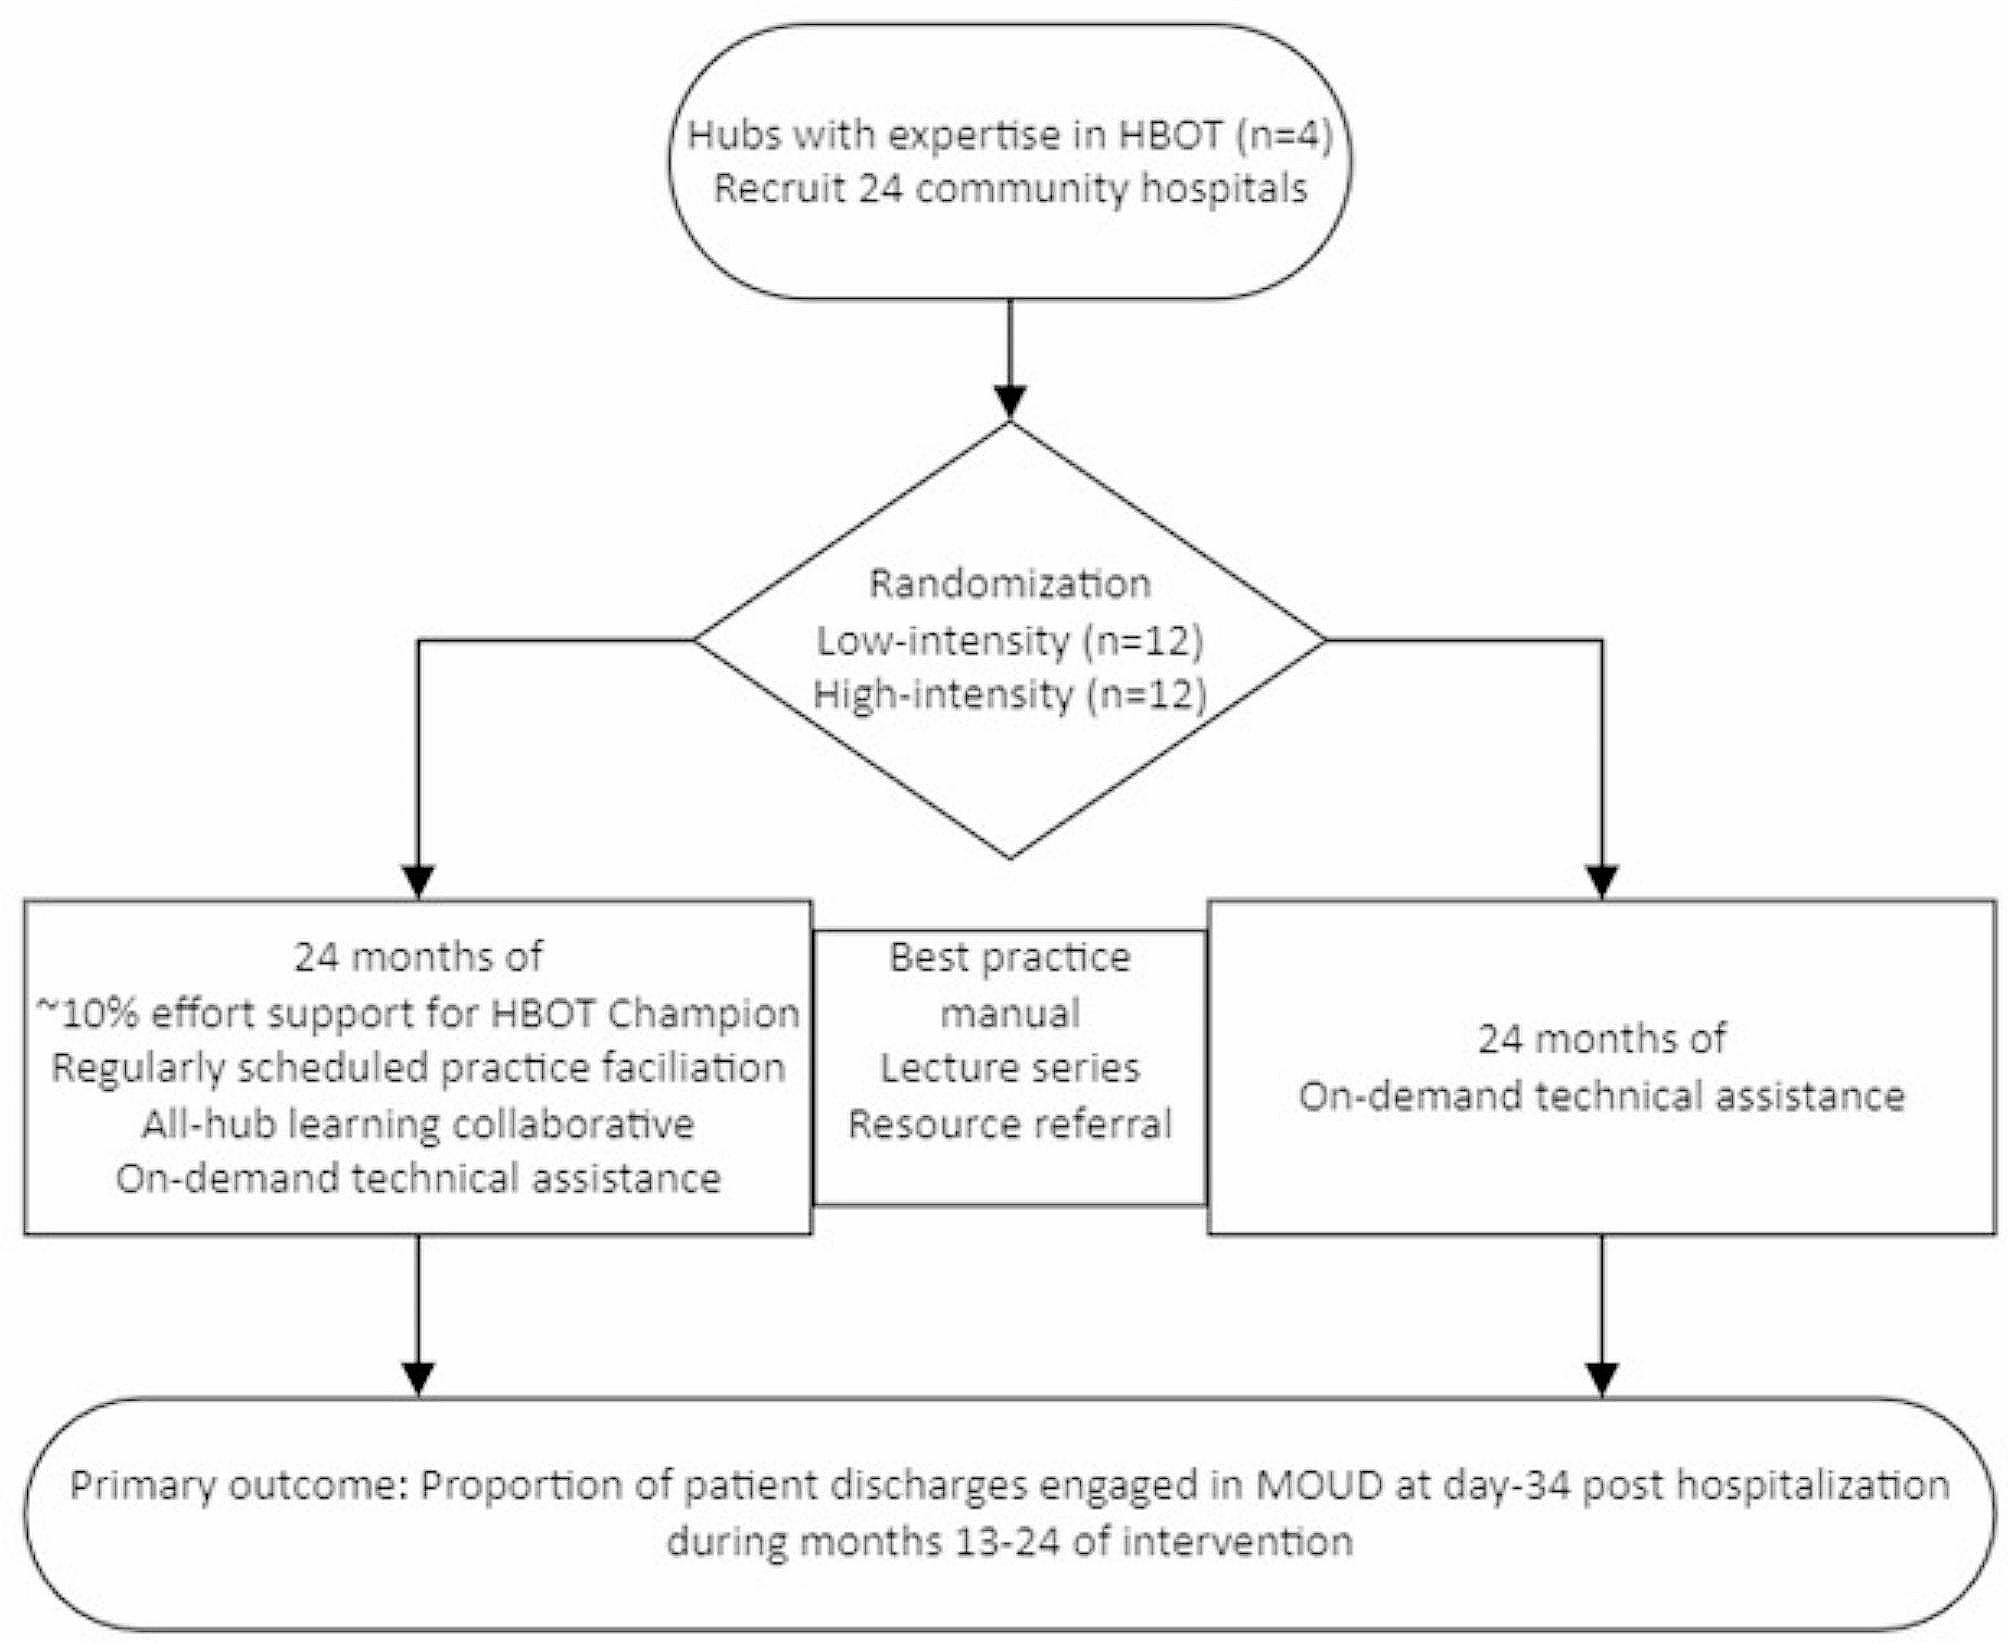 Exemplar Hospital initiation trial to Enhance Treatment Engagement (EXHIT ENTRE): protocol for CTN-0098B a randomized implementation study to support hospitals in caring for patients with opioid use disorder